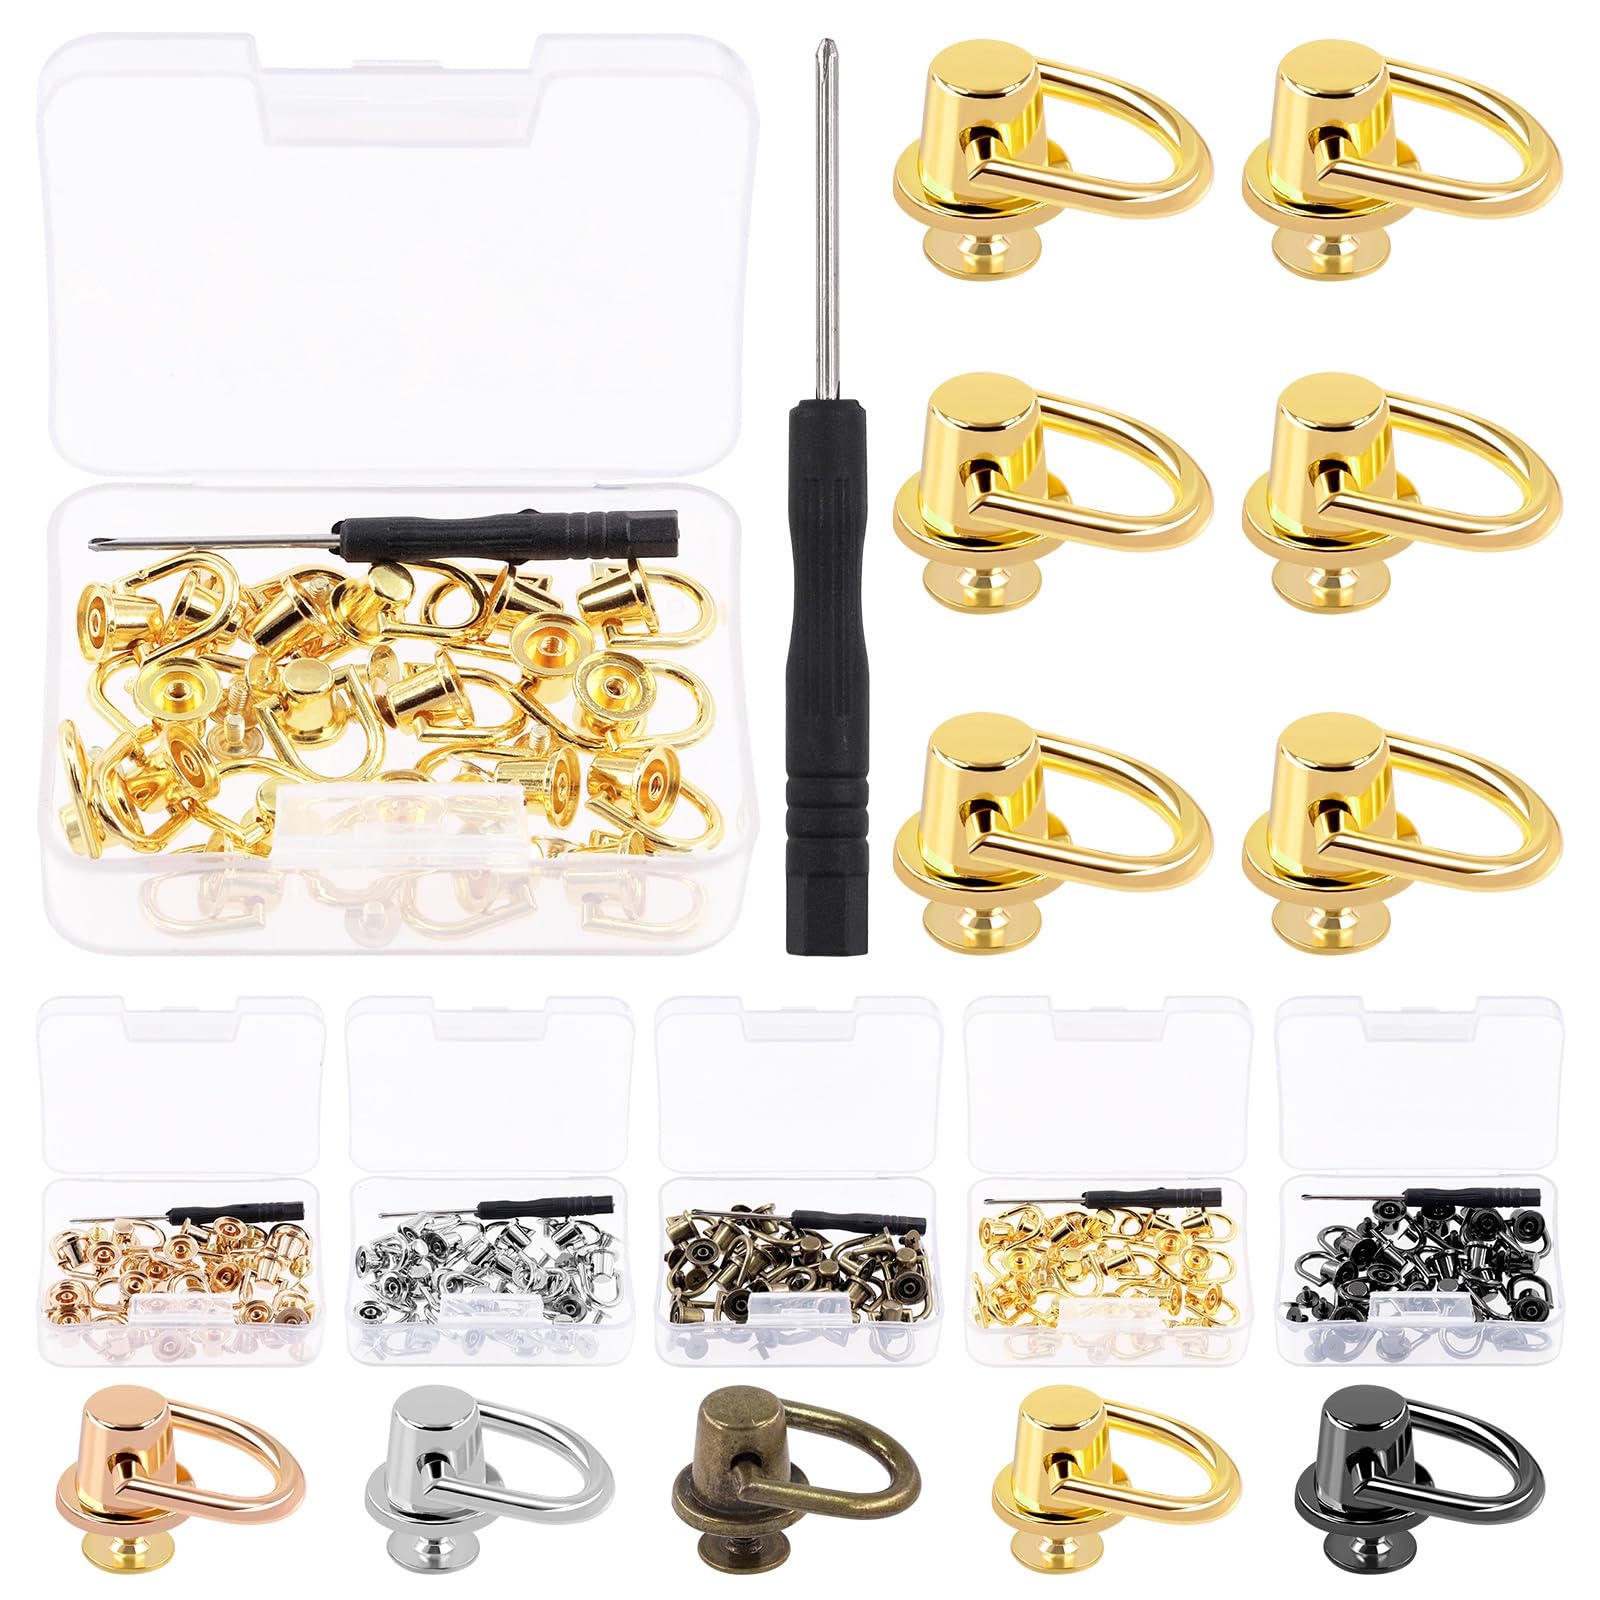 Glarks 21Pcs D Ring Rivets 5 Colors Ball Post Head Buttons Metal D Ring Stud Rivets Rotatable Round Rivets with Screwdriver, for Bags, Belts (Gold)